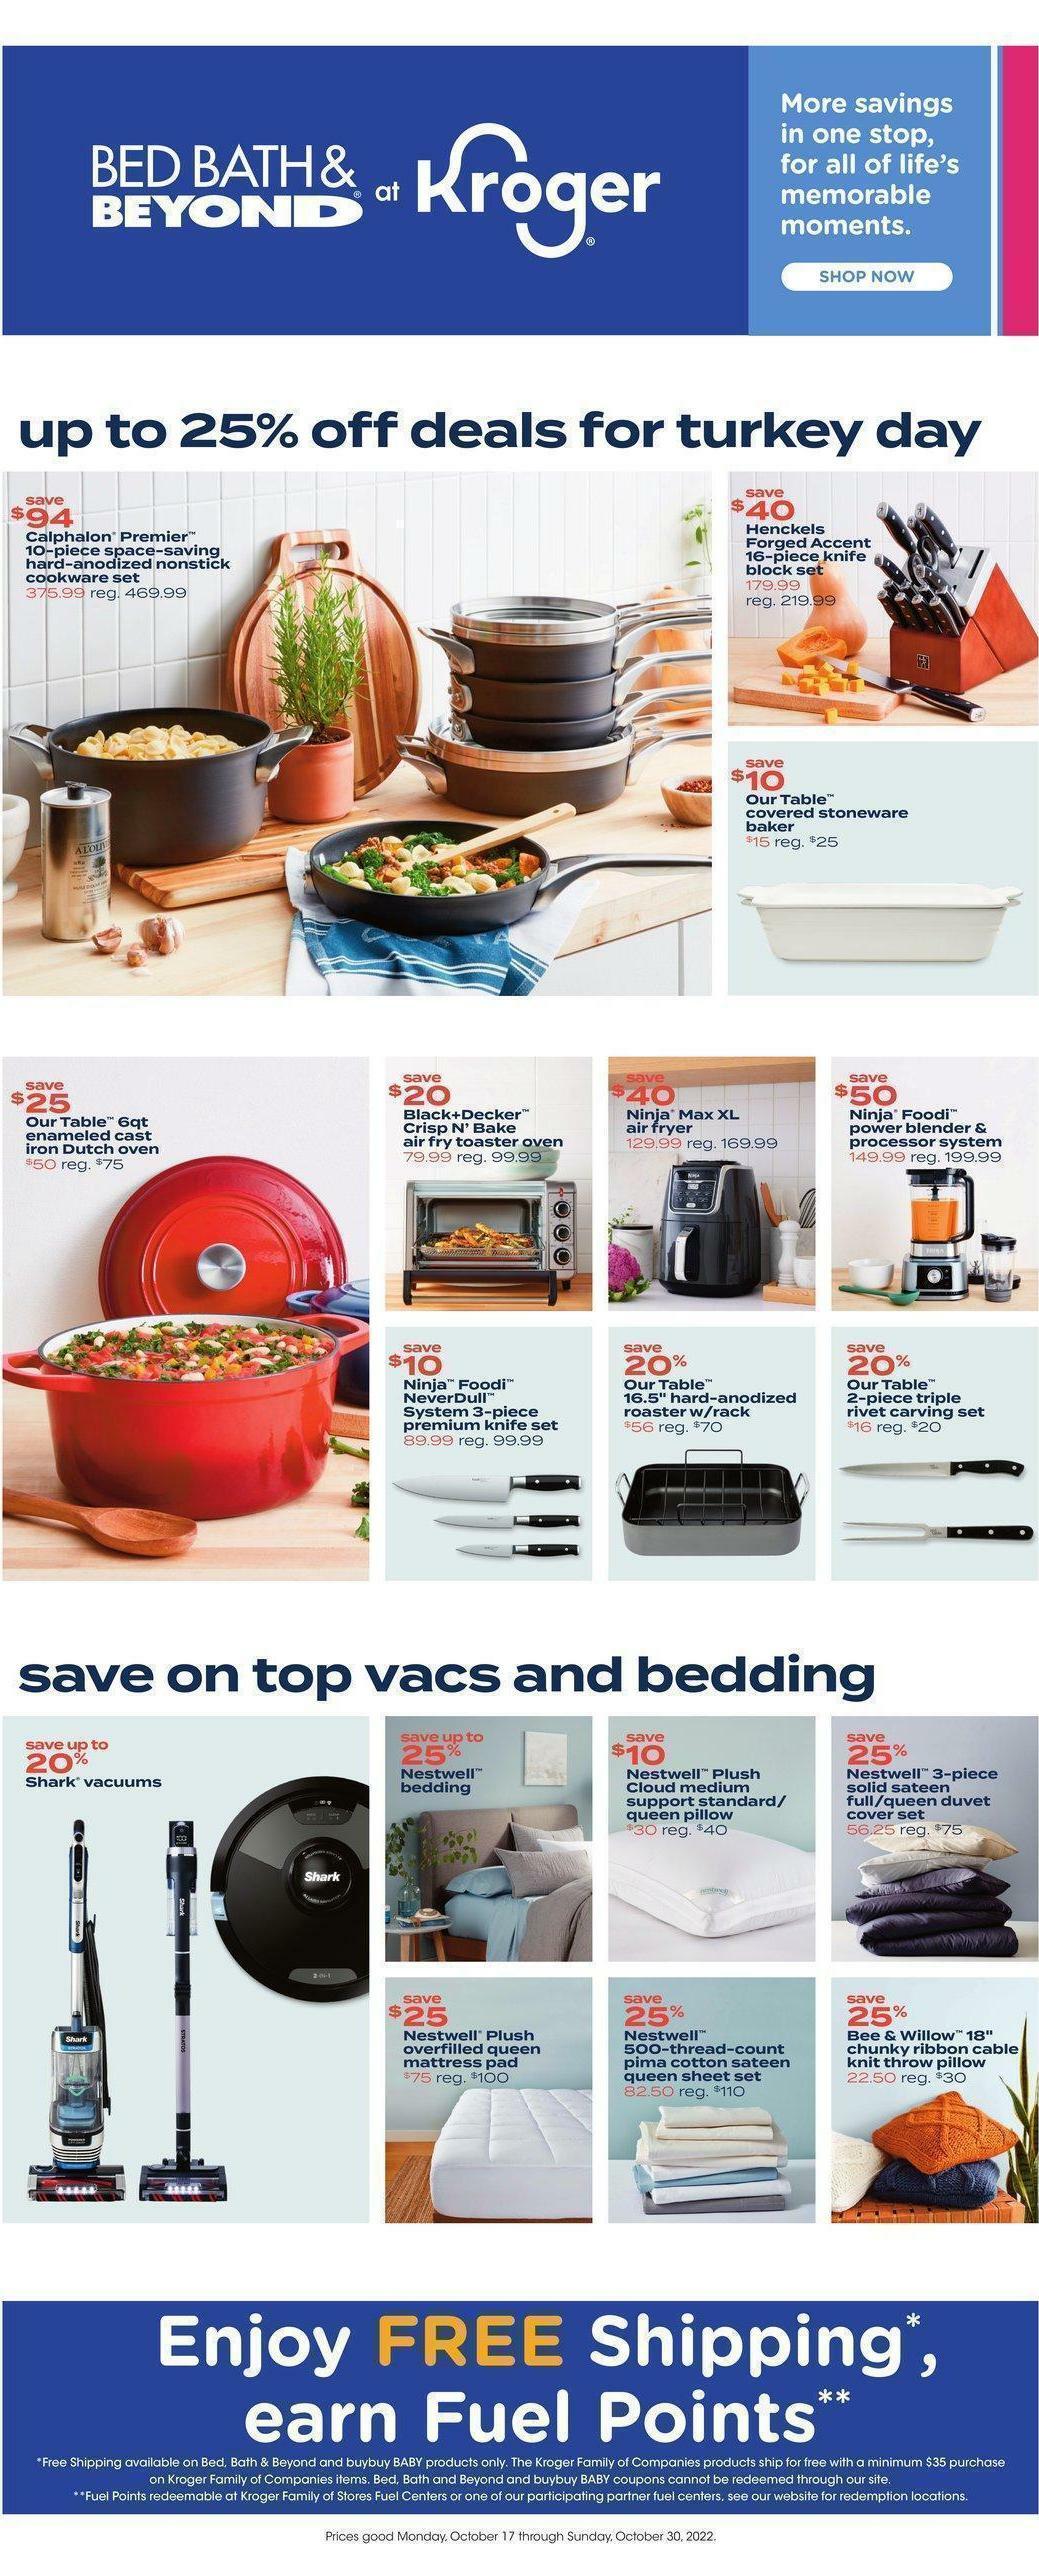 Kroger Bed, Bath & Beyond Weekly Ad from October 17